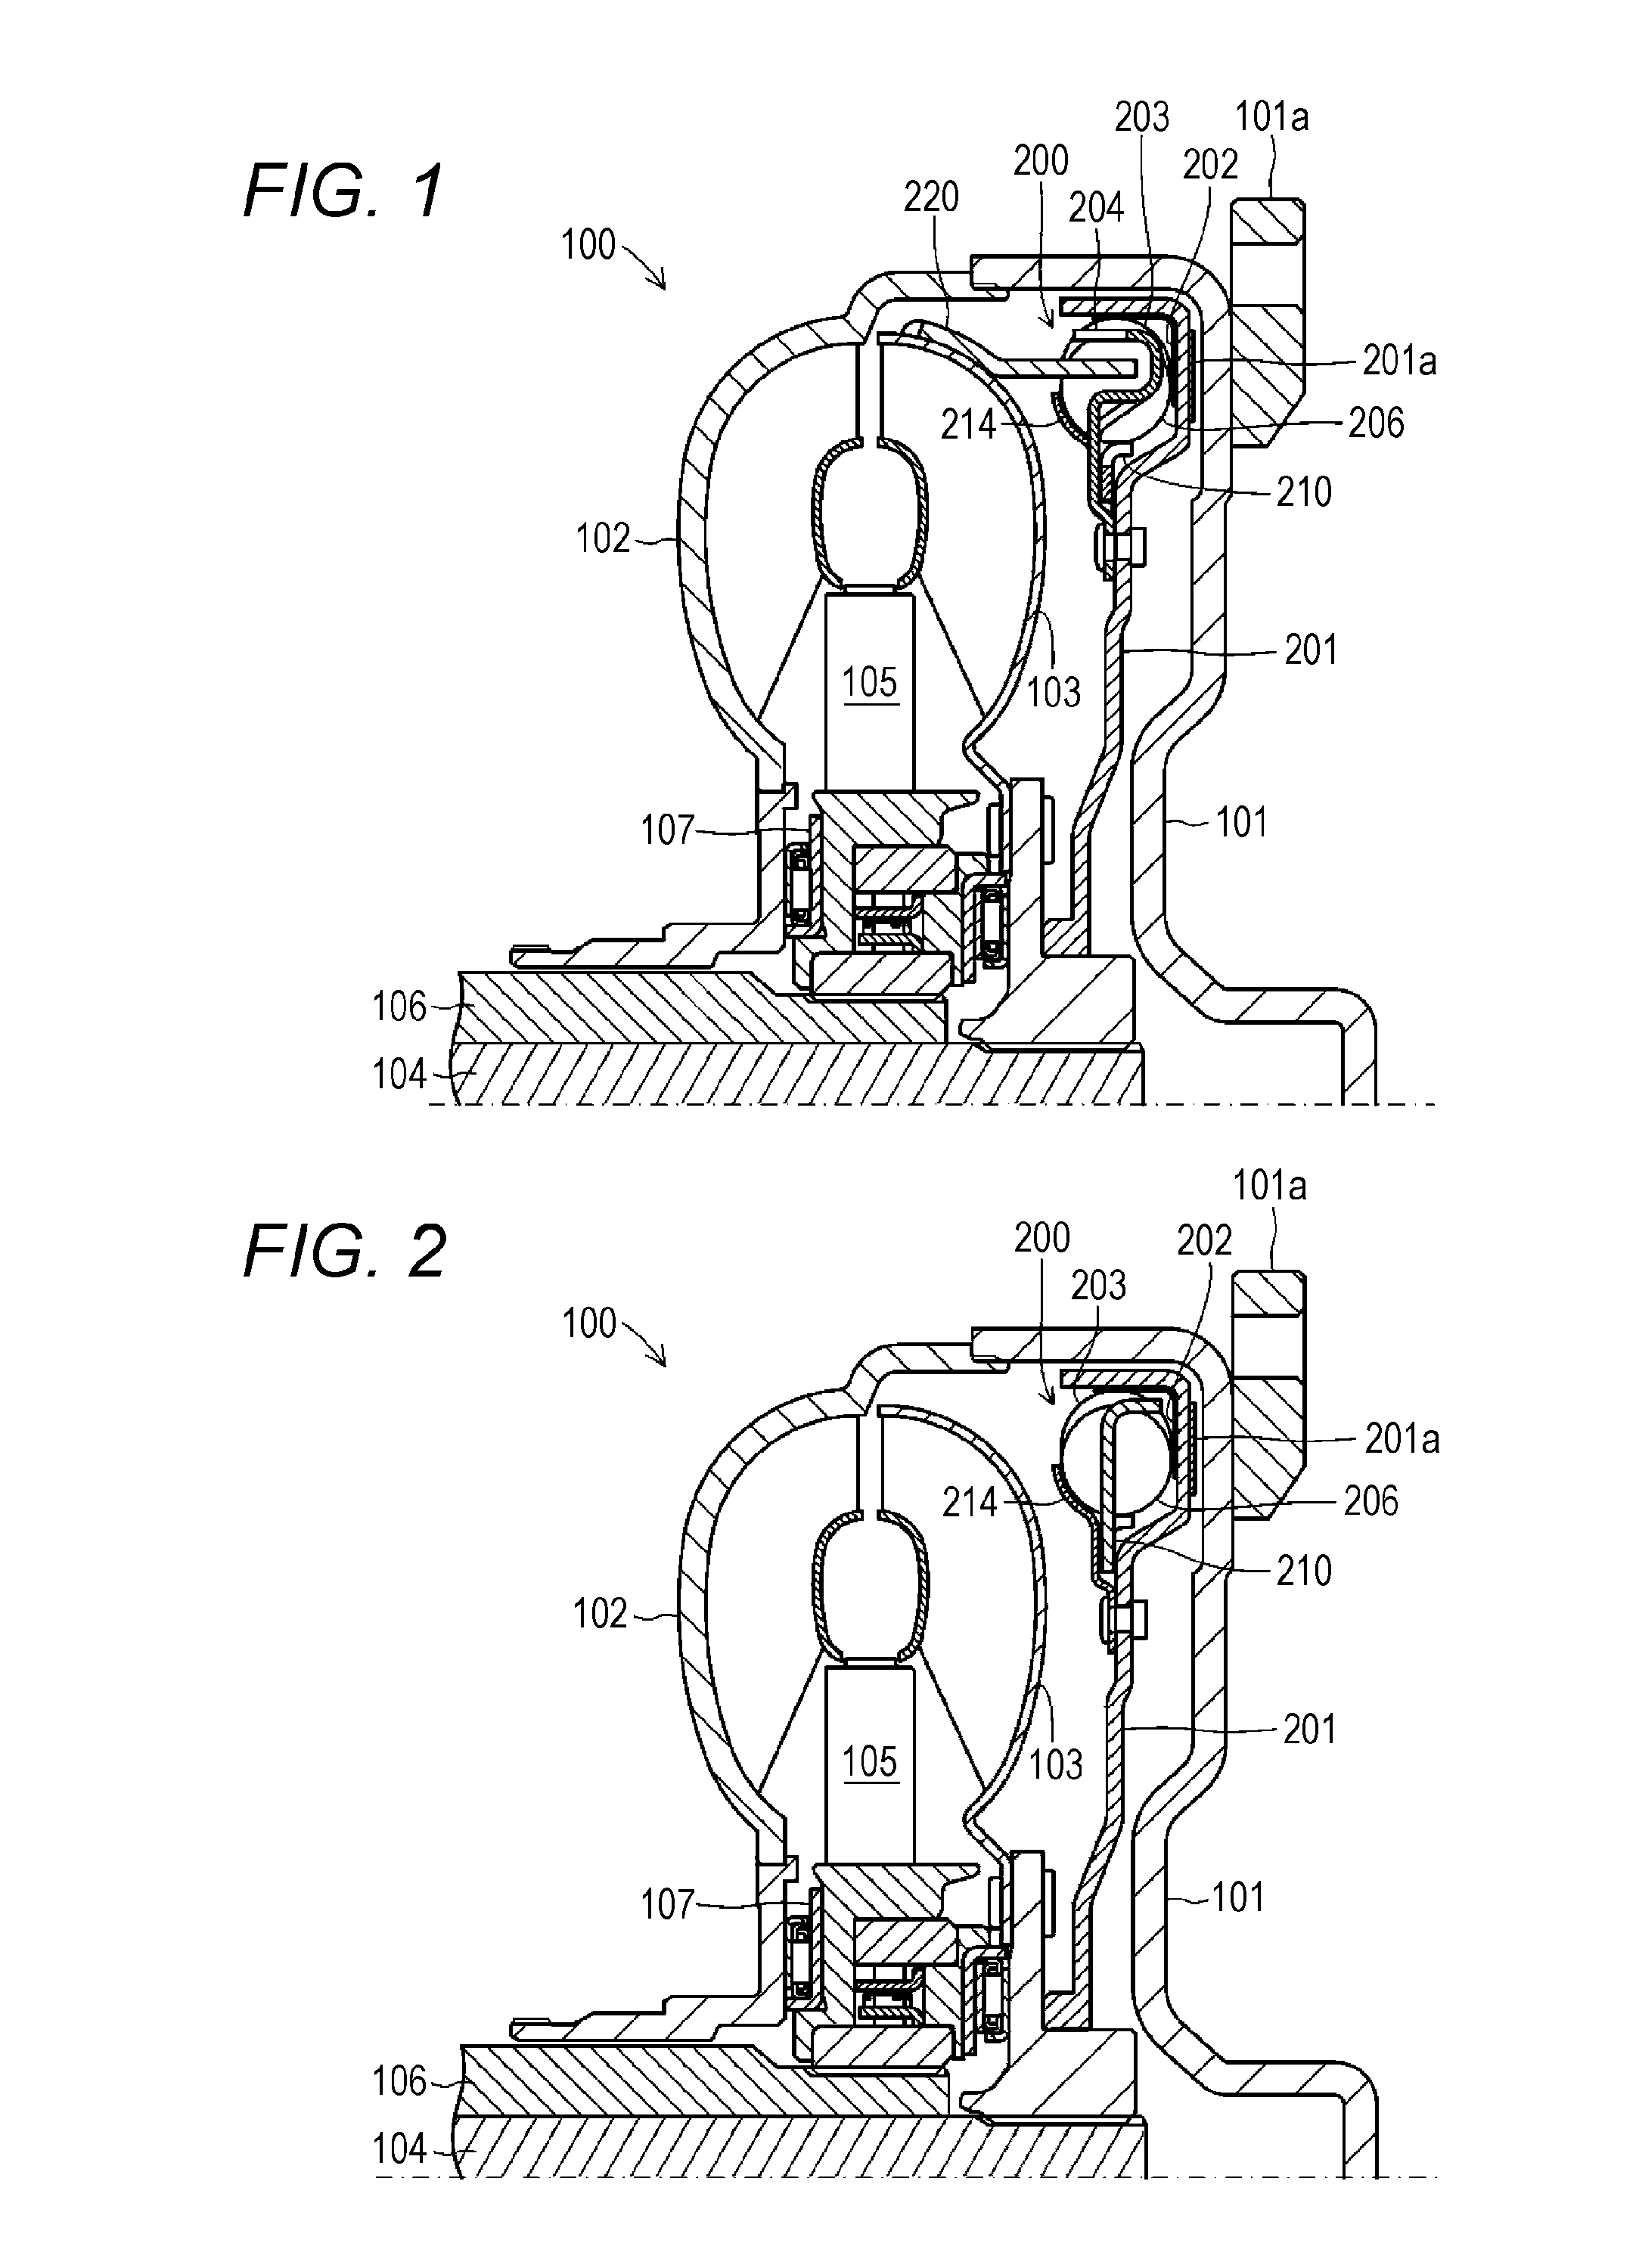 Lock-up device and torque converter